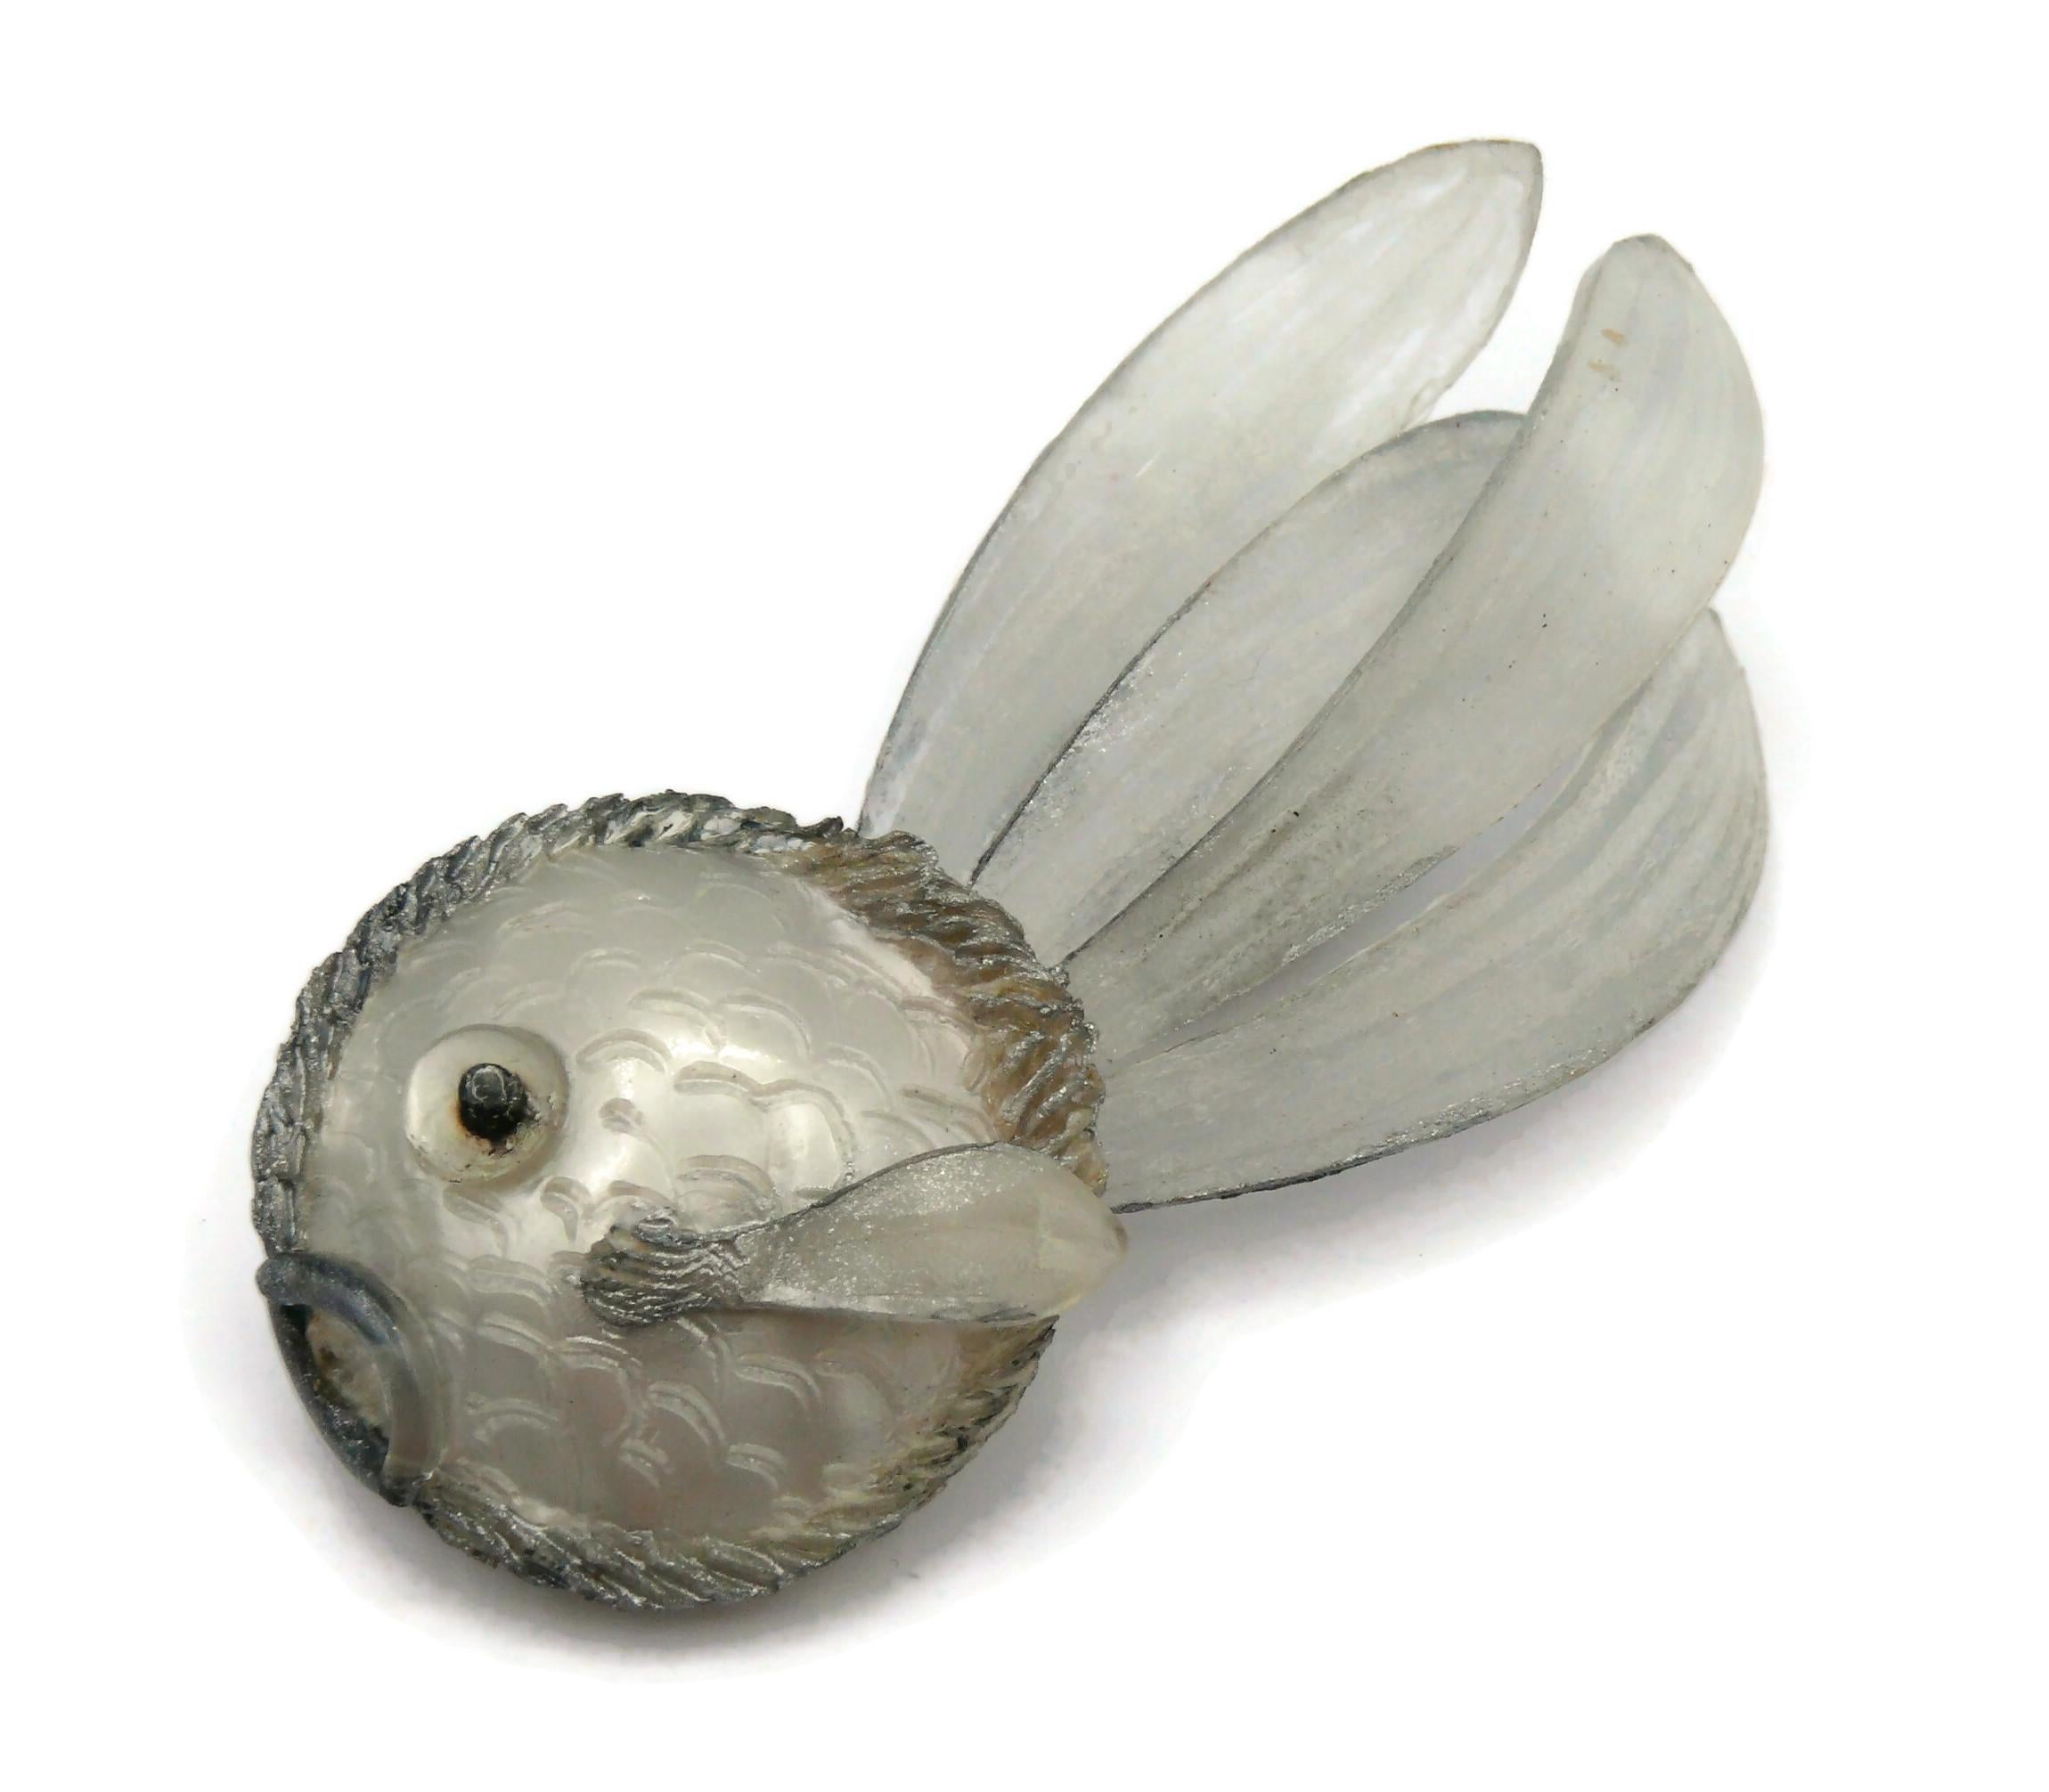 MONIQUE VEDIE (attributed to) Vintage Talosel Resin Fish Lapel Pin Brooch In Good Condition For Sale In Nice, FR